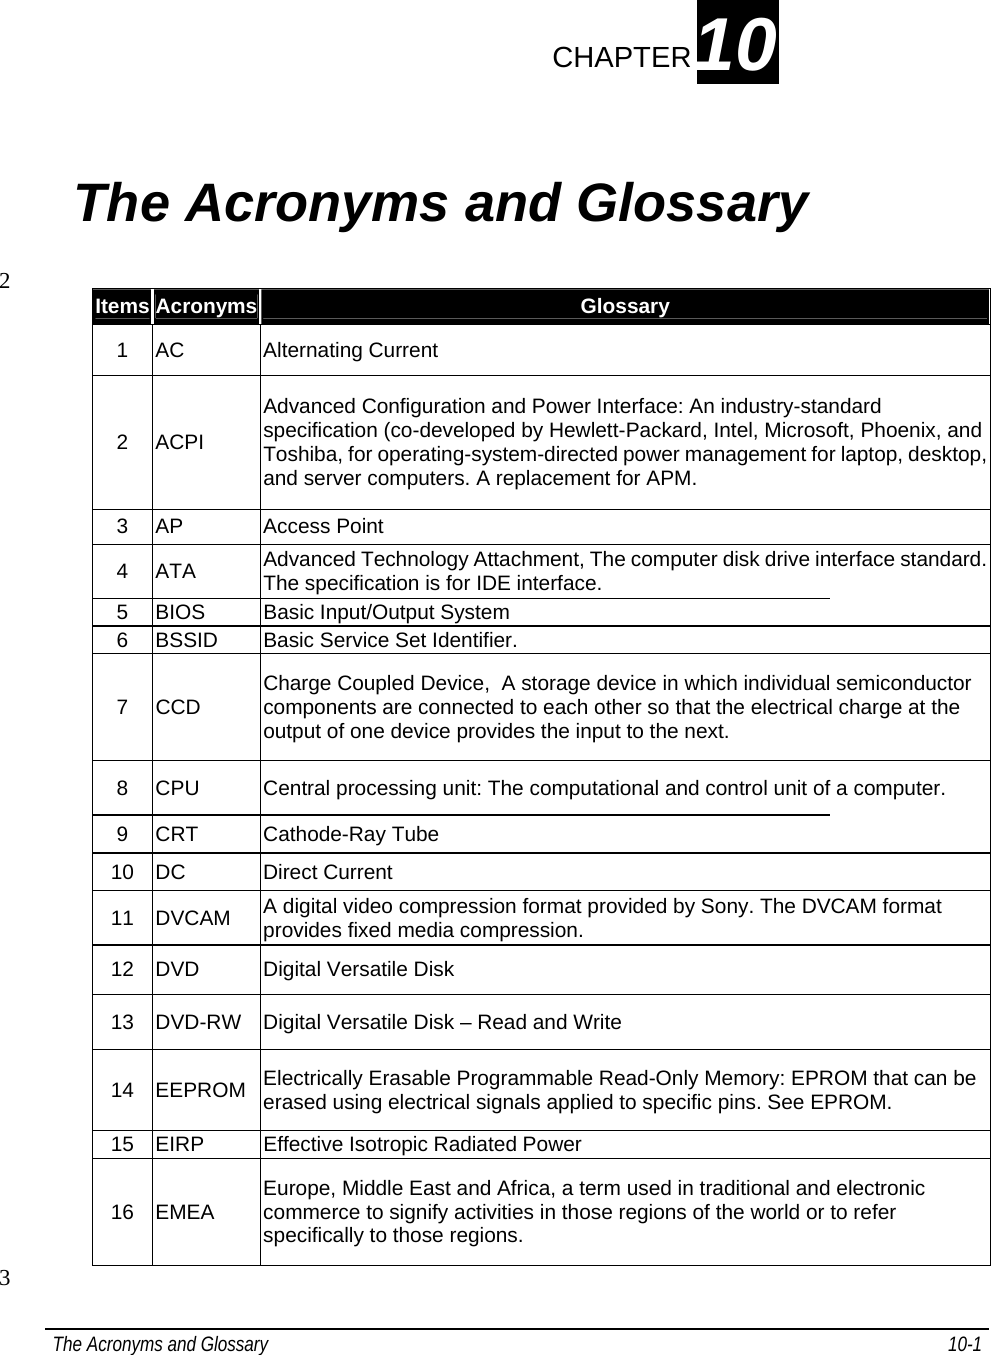  The Acronyms and Glossary   10-1 CHAPTER10 1 The Acronyms and Glossary                      2  Items Acronyms  Glossary 1 AC  Alternating Current 2 ACPI  Advanced Configuration and Power Interface: An industry-standard specification (co-developed by Hewlett-Packard, Intel, Microsoft, Phoenix, and Toshiba, for operating-system-directed power management for laptop, desktop, and server computers. A replacement for APM.  3 AP  Access Point 4 ATA  Advanced Technology Attachment, The computer disk drive interface standard. The specification is for IDE interface. 5  BIOS  Basic Input/Output System 6  BSSID  Basic Service Set Identifier. 7 CCD   Charge Coupled Device,  A storage device in which individual semiconductor components are connected to each other so that the electrical charge at the output of one device provides the input to the next. 8  CPU  Central processing unit: The computational and control unit of a computer. 9 CRT  Cathode-Ray Tube 10 DC  Direct Current 11 DVCAM  A digital video compression format provided by Sony. The DVCAM format provides fixed media compression. 12  DVD  Digital Versatile Disk 13  DVD-RW  Digital Versatile Disk – Read and Write 14 EEPROM Electrically Erasable Programmable Read-Only Memory: EPROM that can be erased using electrical signals applied to specific pins. See EPROM. 15  EIRP  Effective Isotropic Radiated Power 16 EMEA  Europe, Middle East and Africa, a term used in traditional and electronic commerce to signify activities in those regions of the world or to refer specifically to those regions.  3 